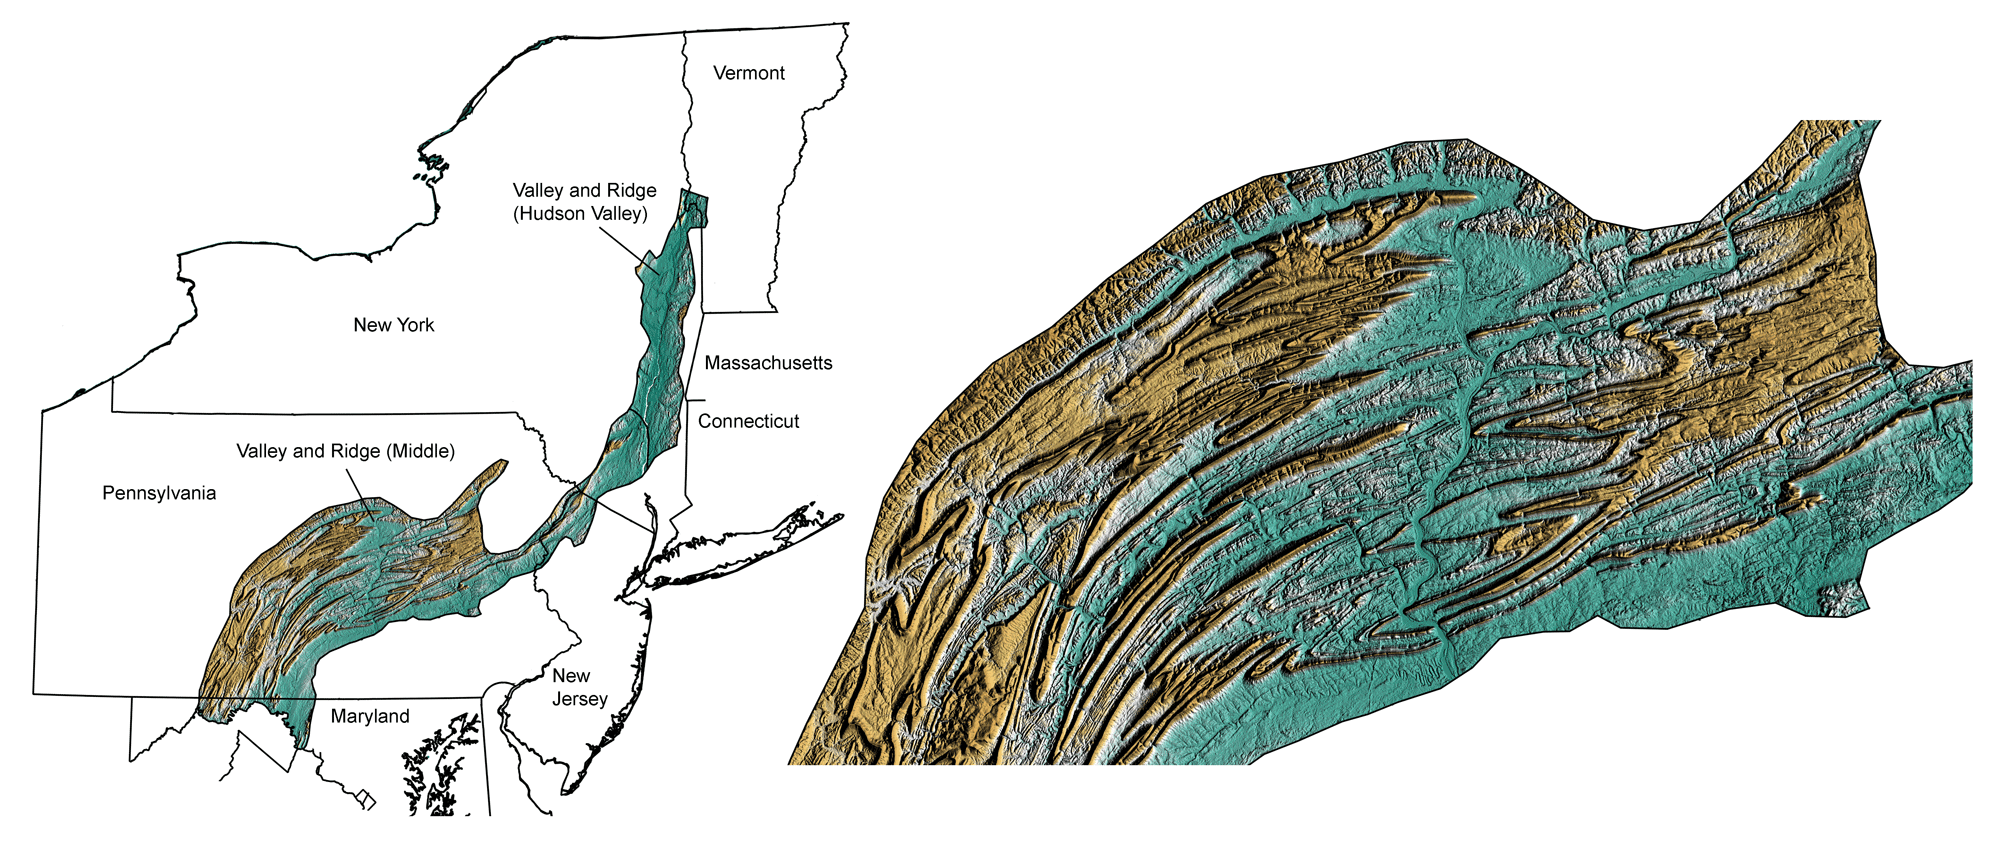 Topographic map of the Valley and Ridge region of the northeastern United States, including zoomed in view of the Valley and Ridge in Pennsylvania.